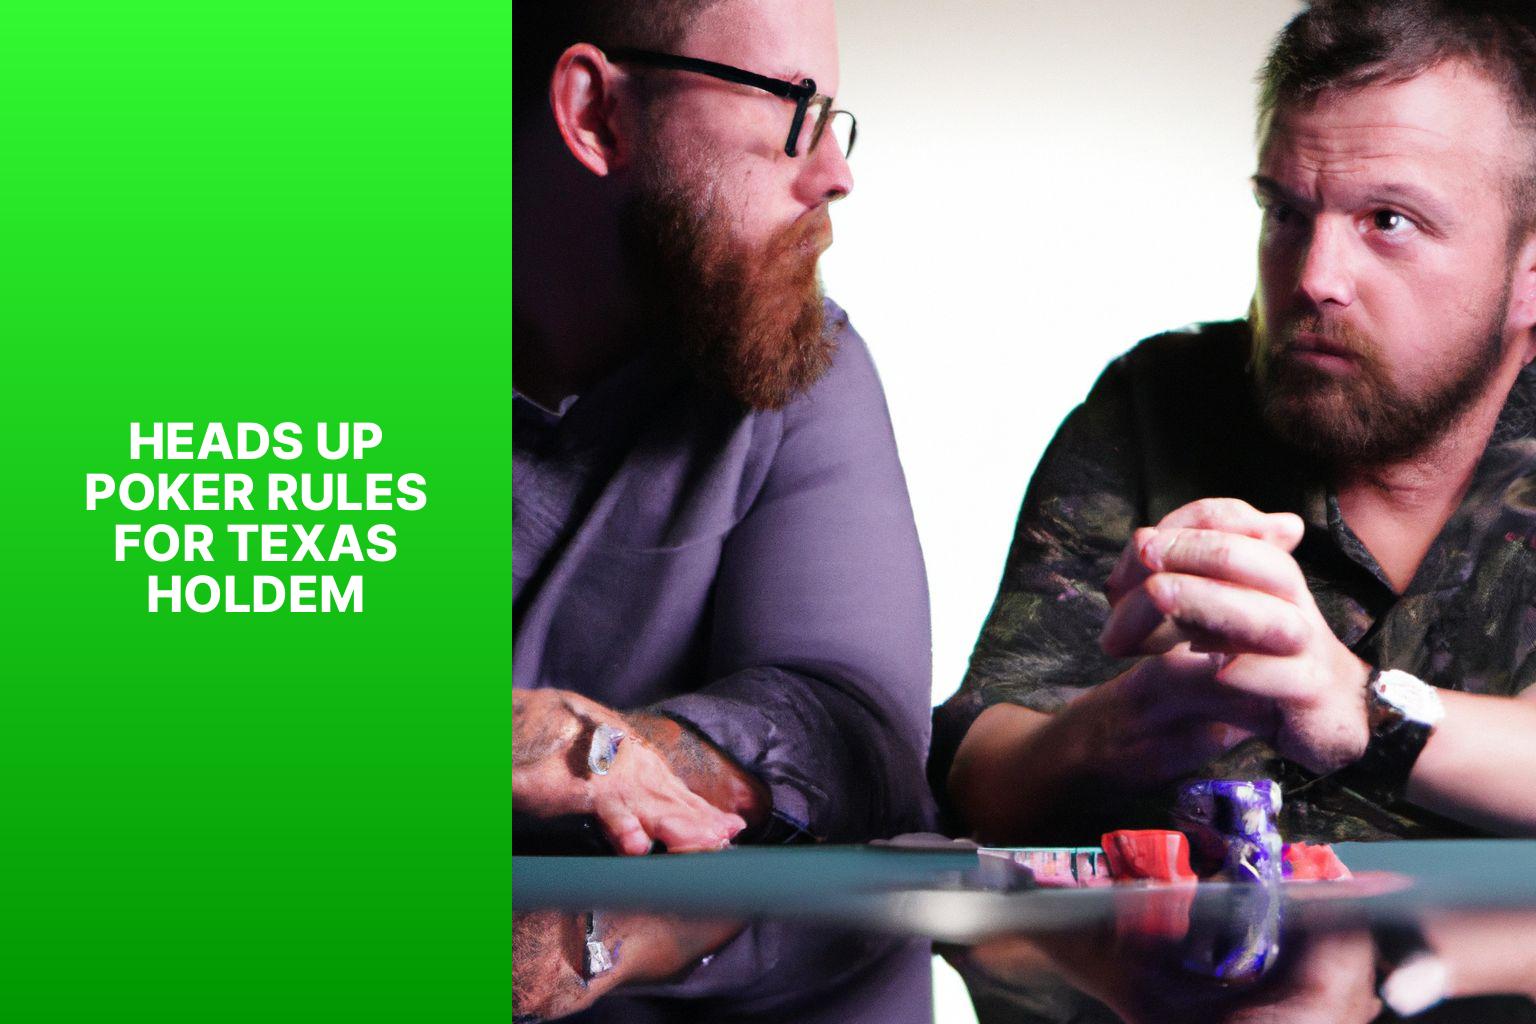 Heads Up Poker Rules for Texas Holdem